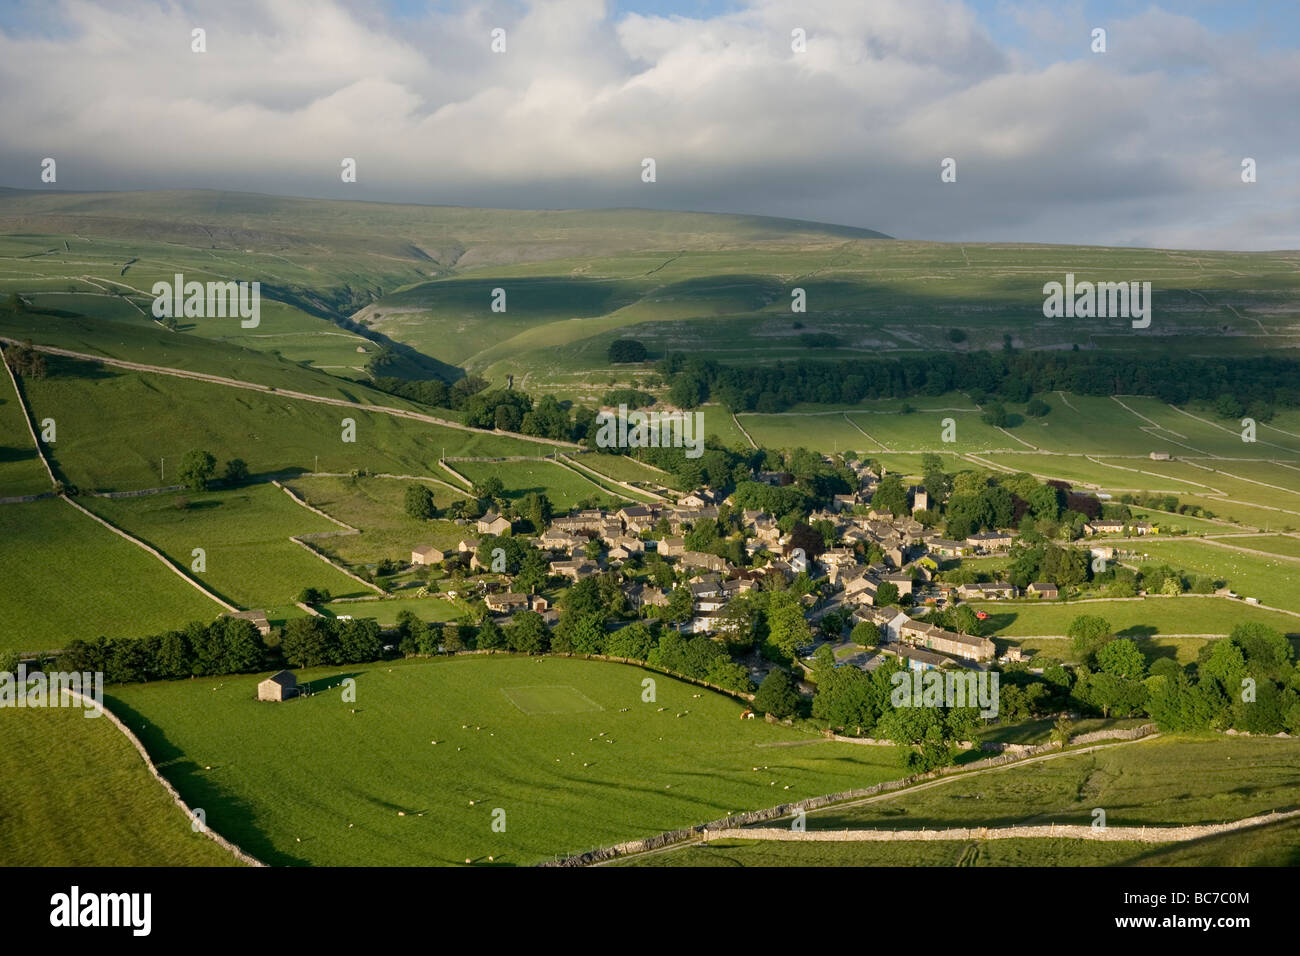 A view of Kettlewell, a village nestled in the valley of Upper Wharfedale, in the Yorkshire Dales National Park, UK Stock Photo